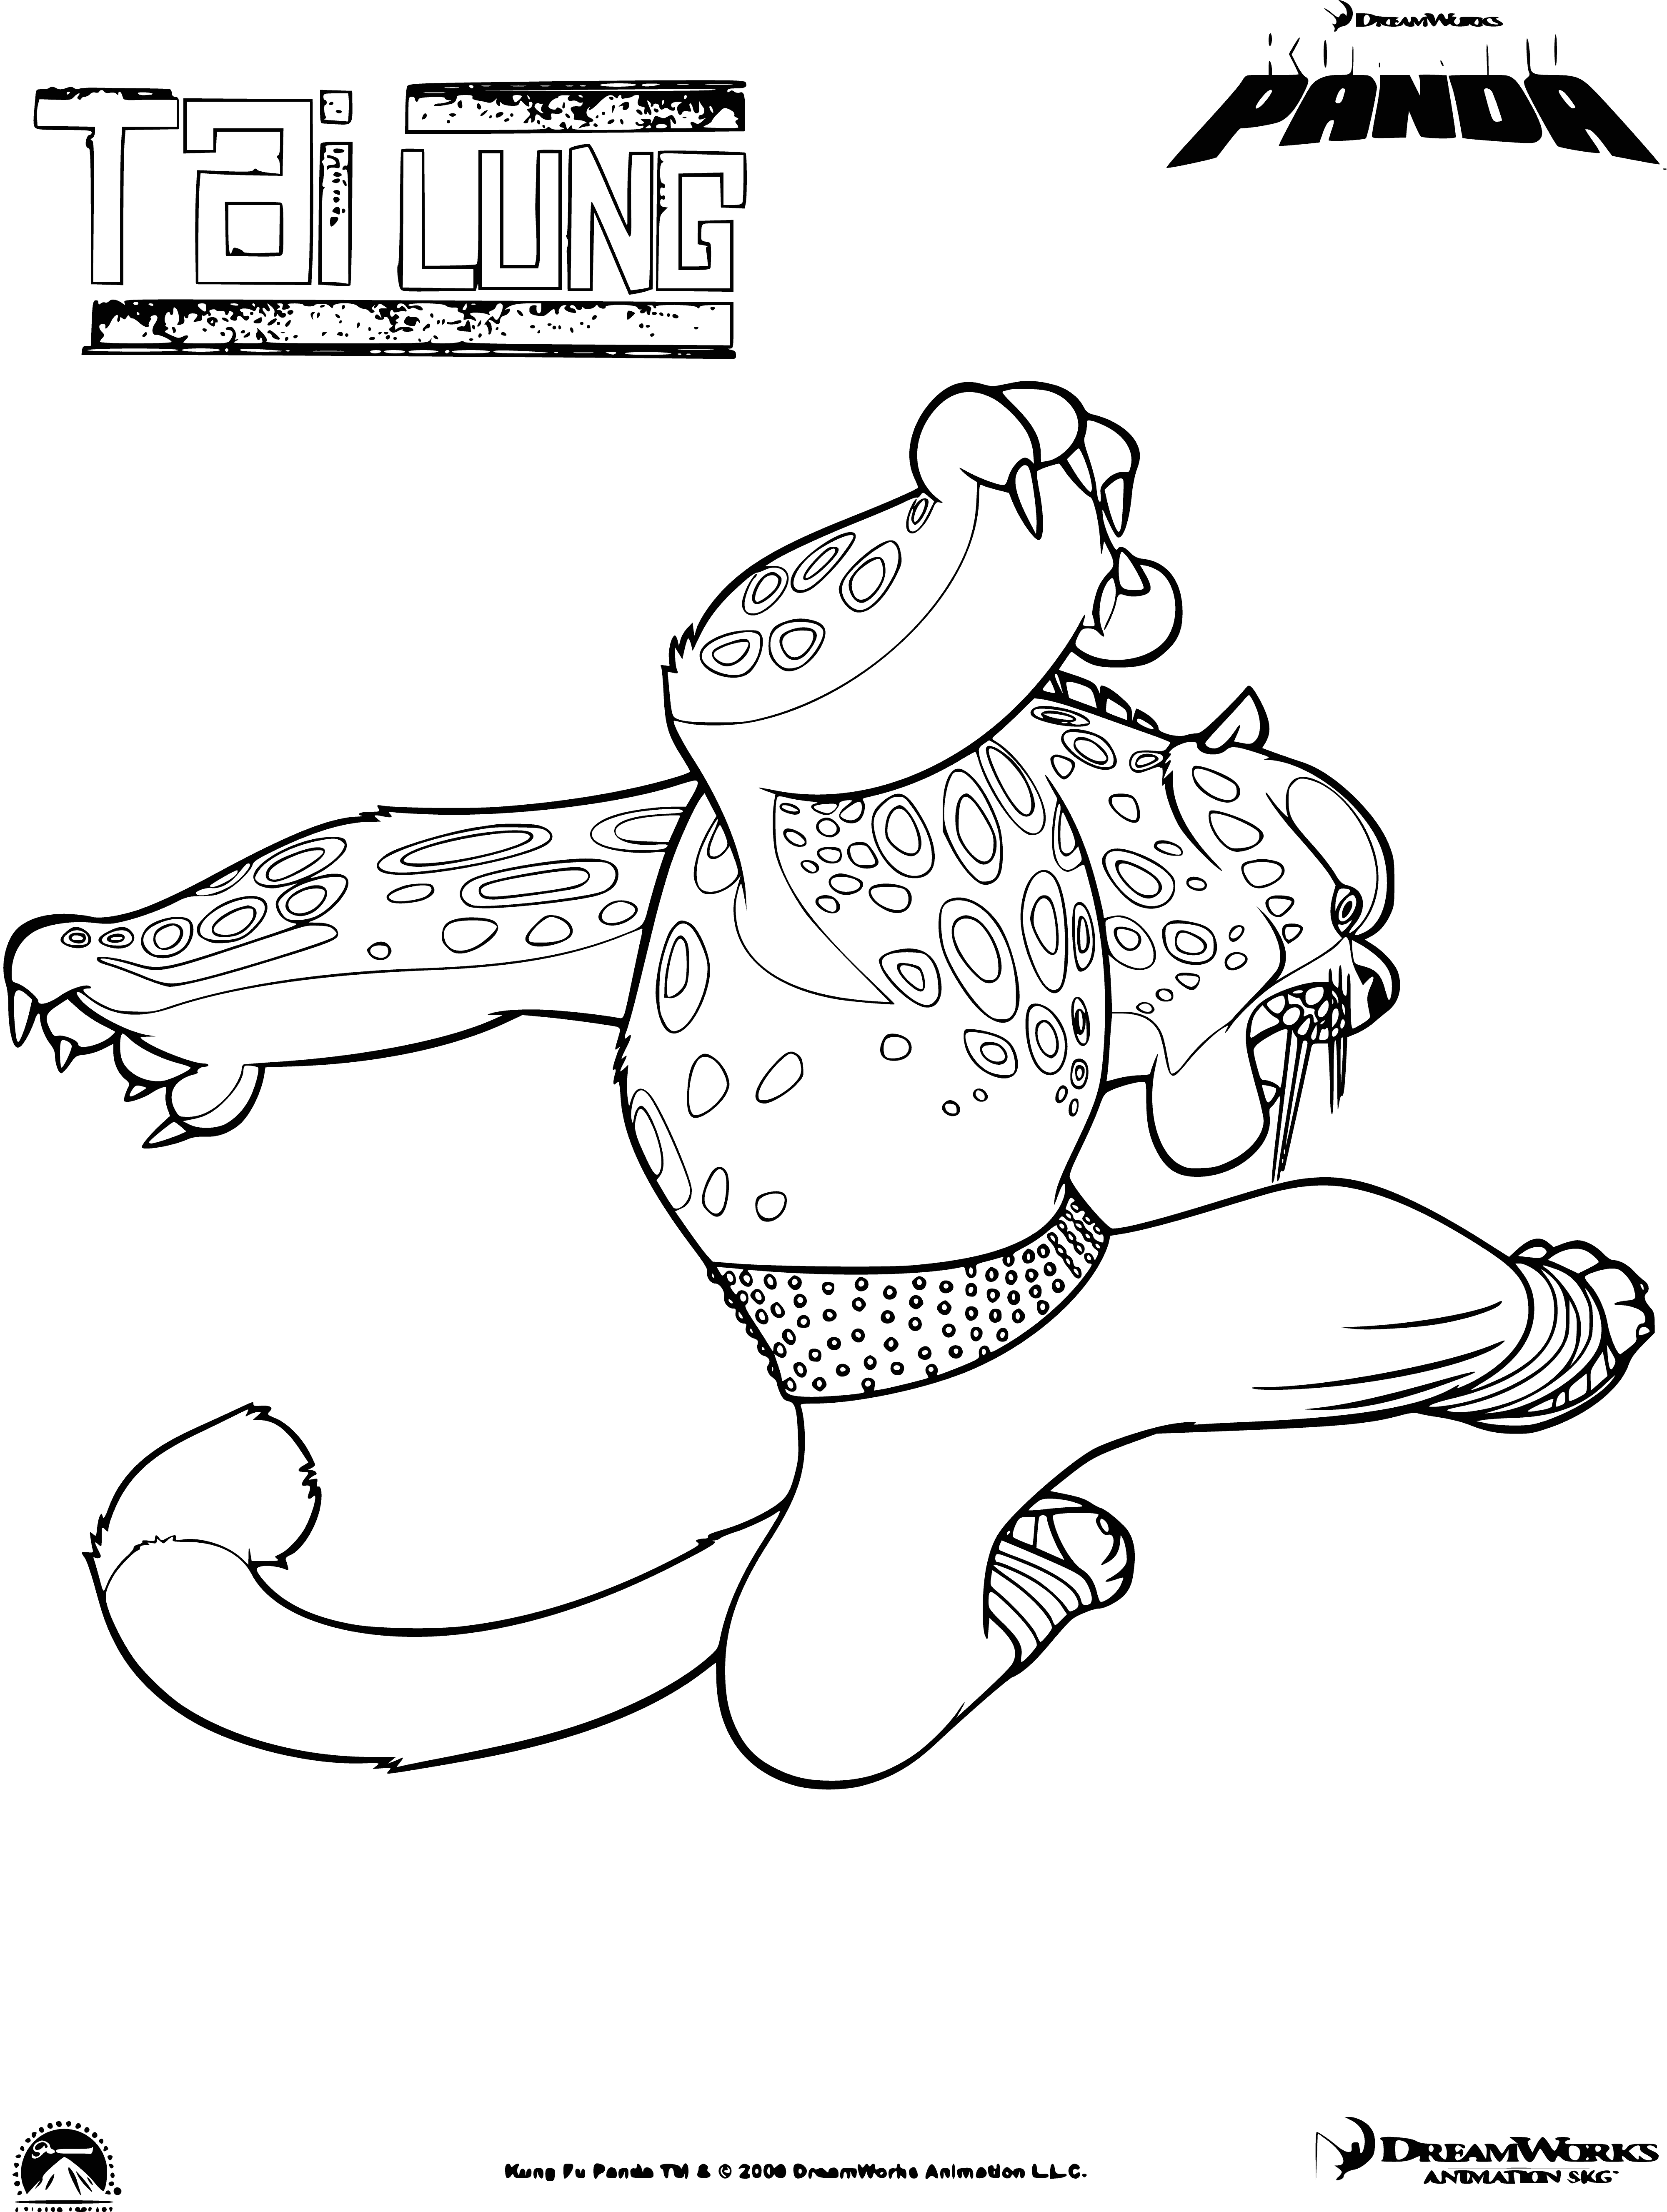 Thai Lung coloring page